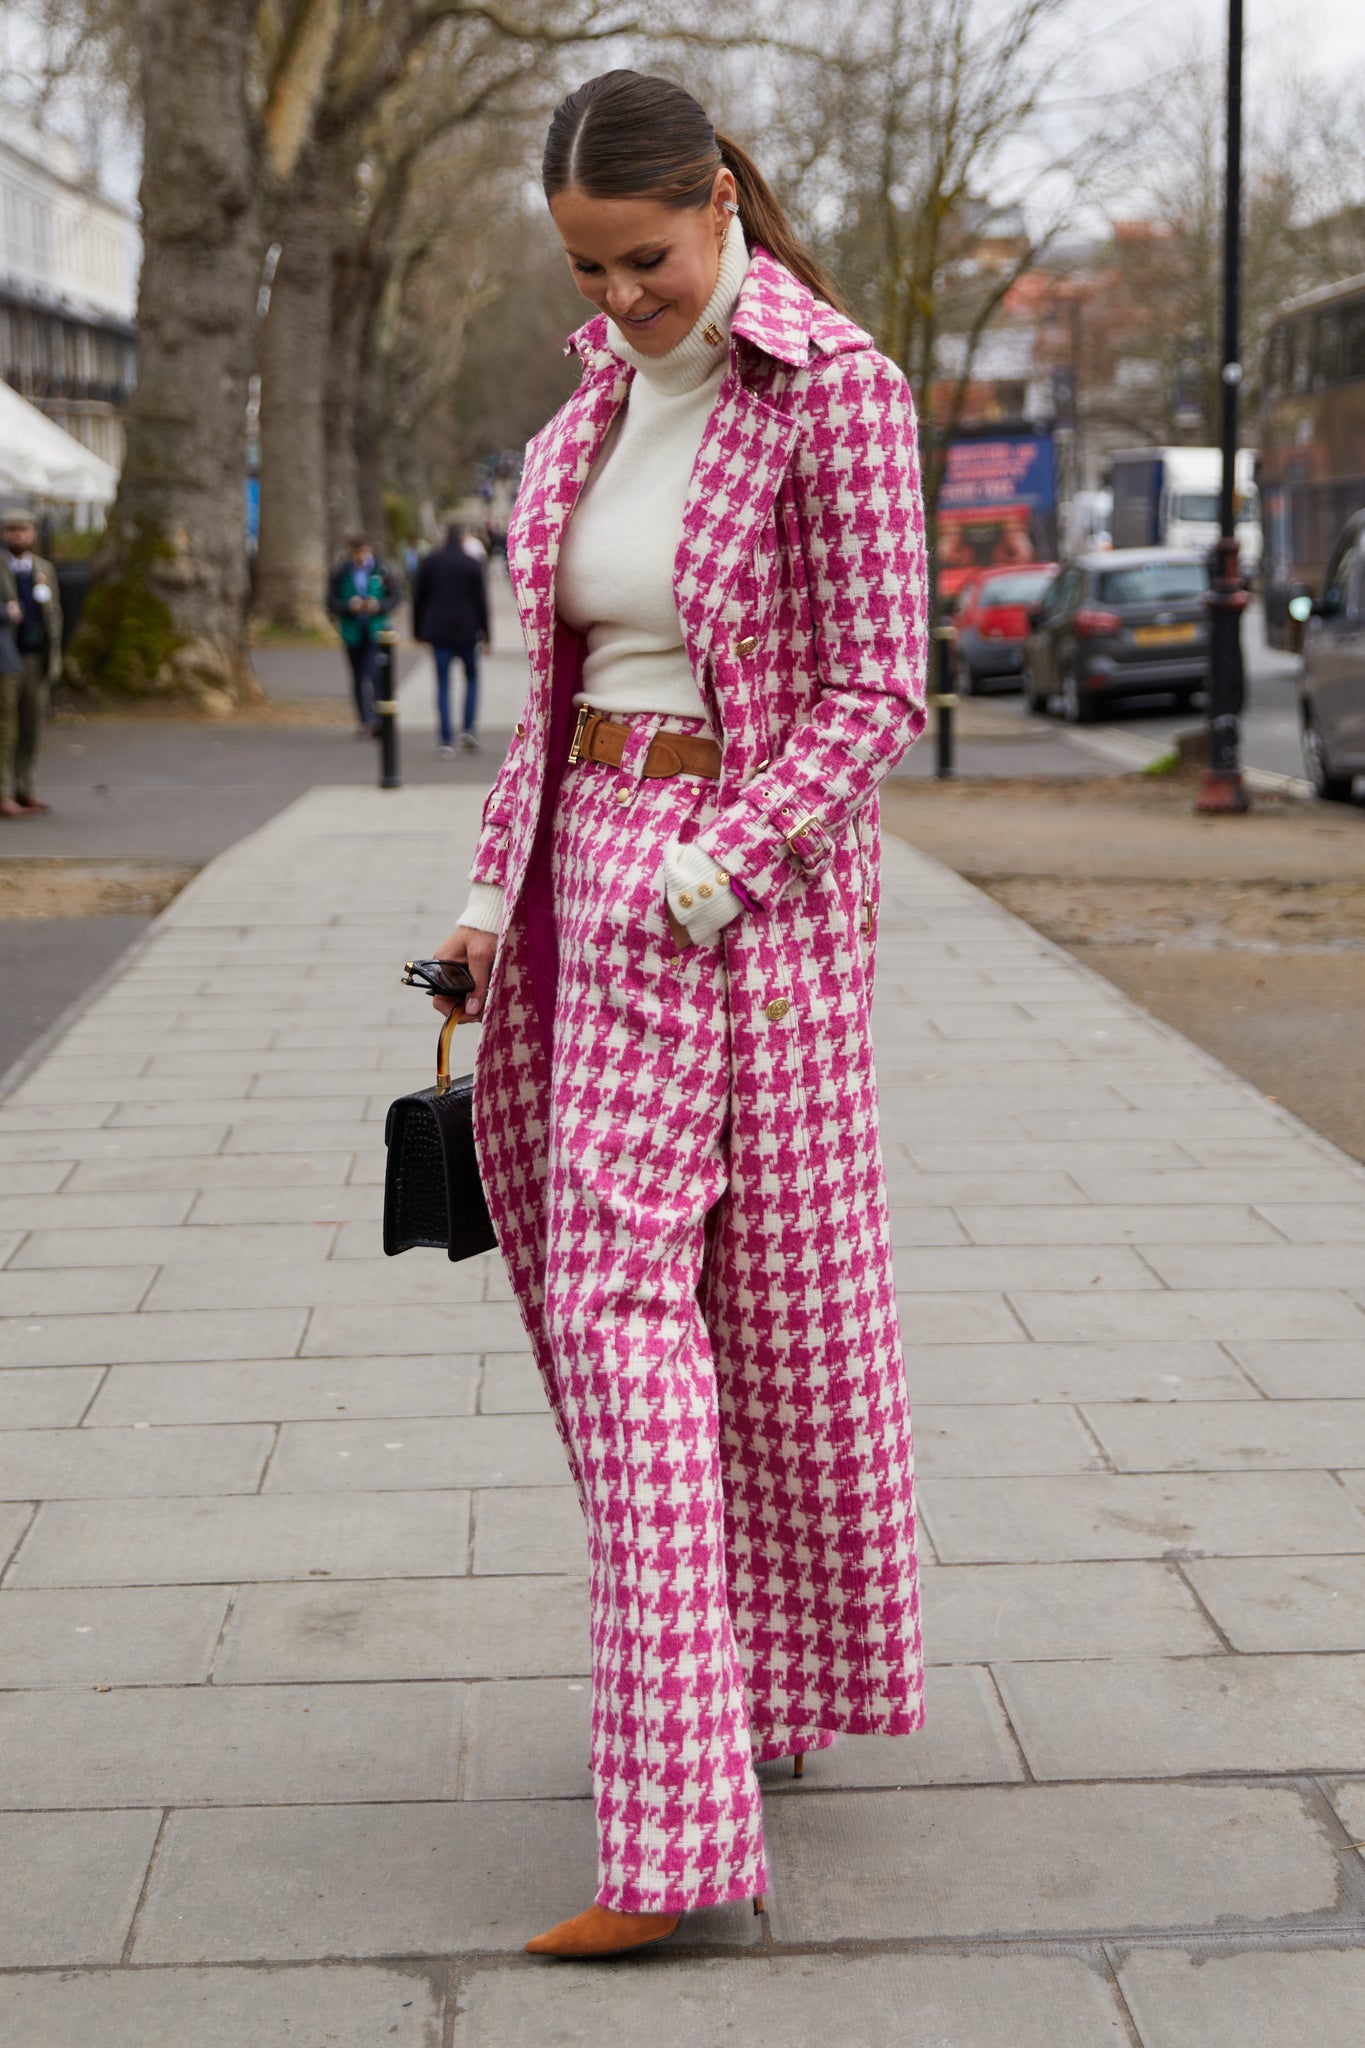 Full Length Marlborough Trench Coat (Hot Pink Large Scale Houndstooth)